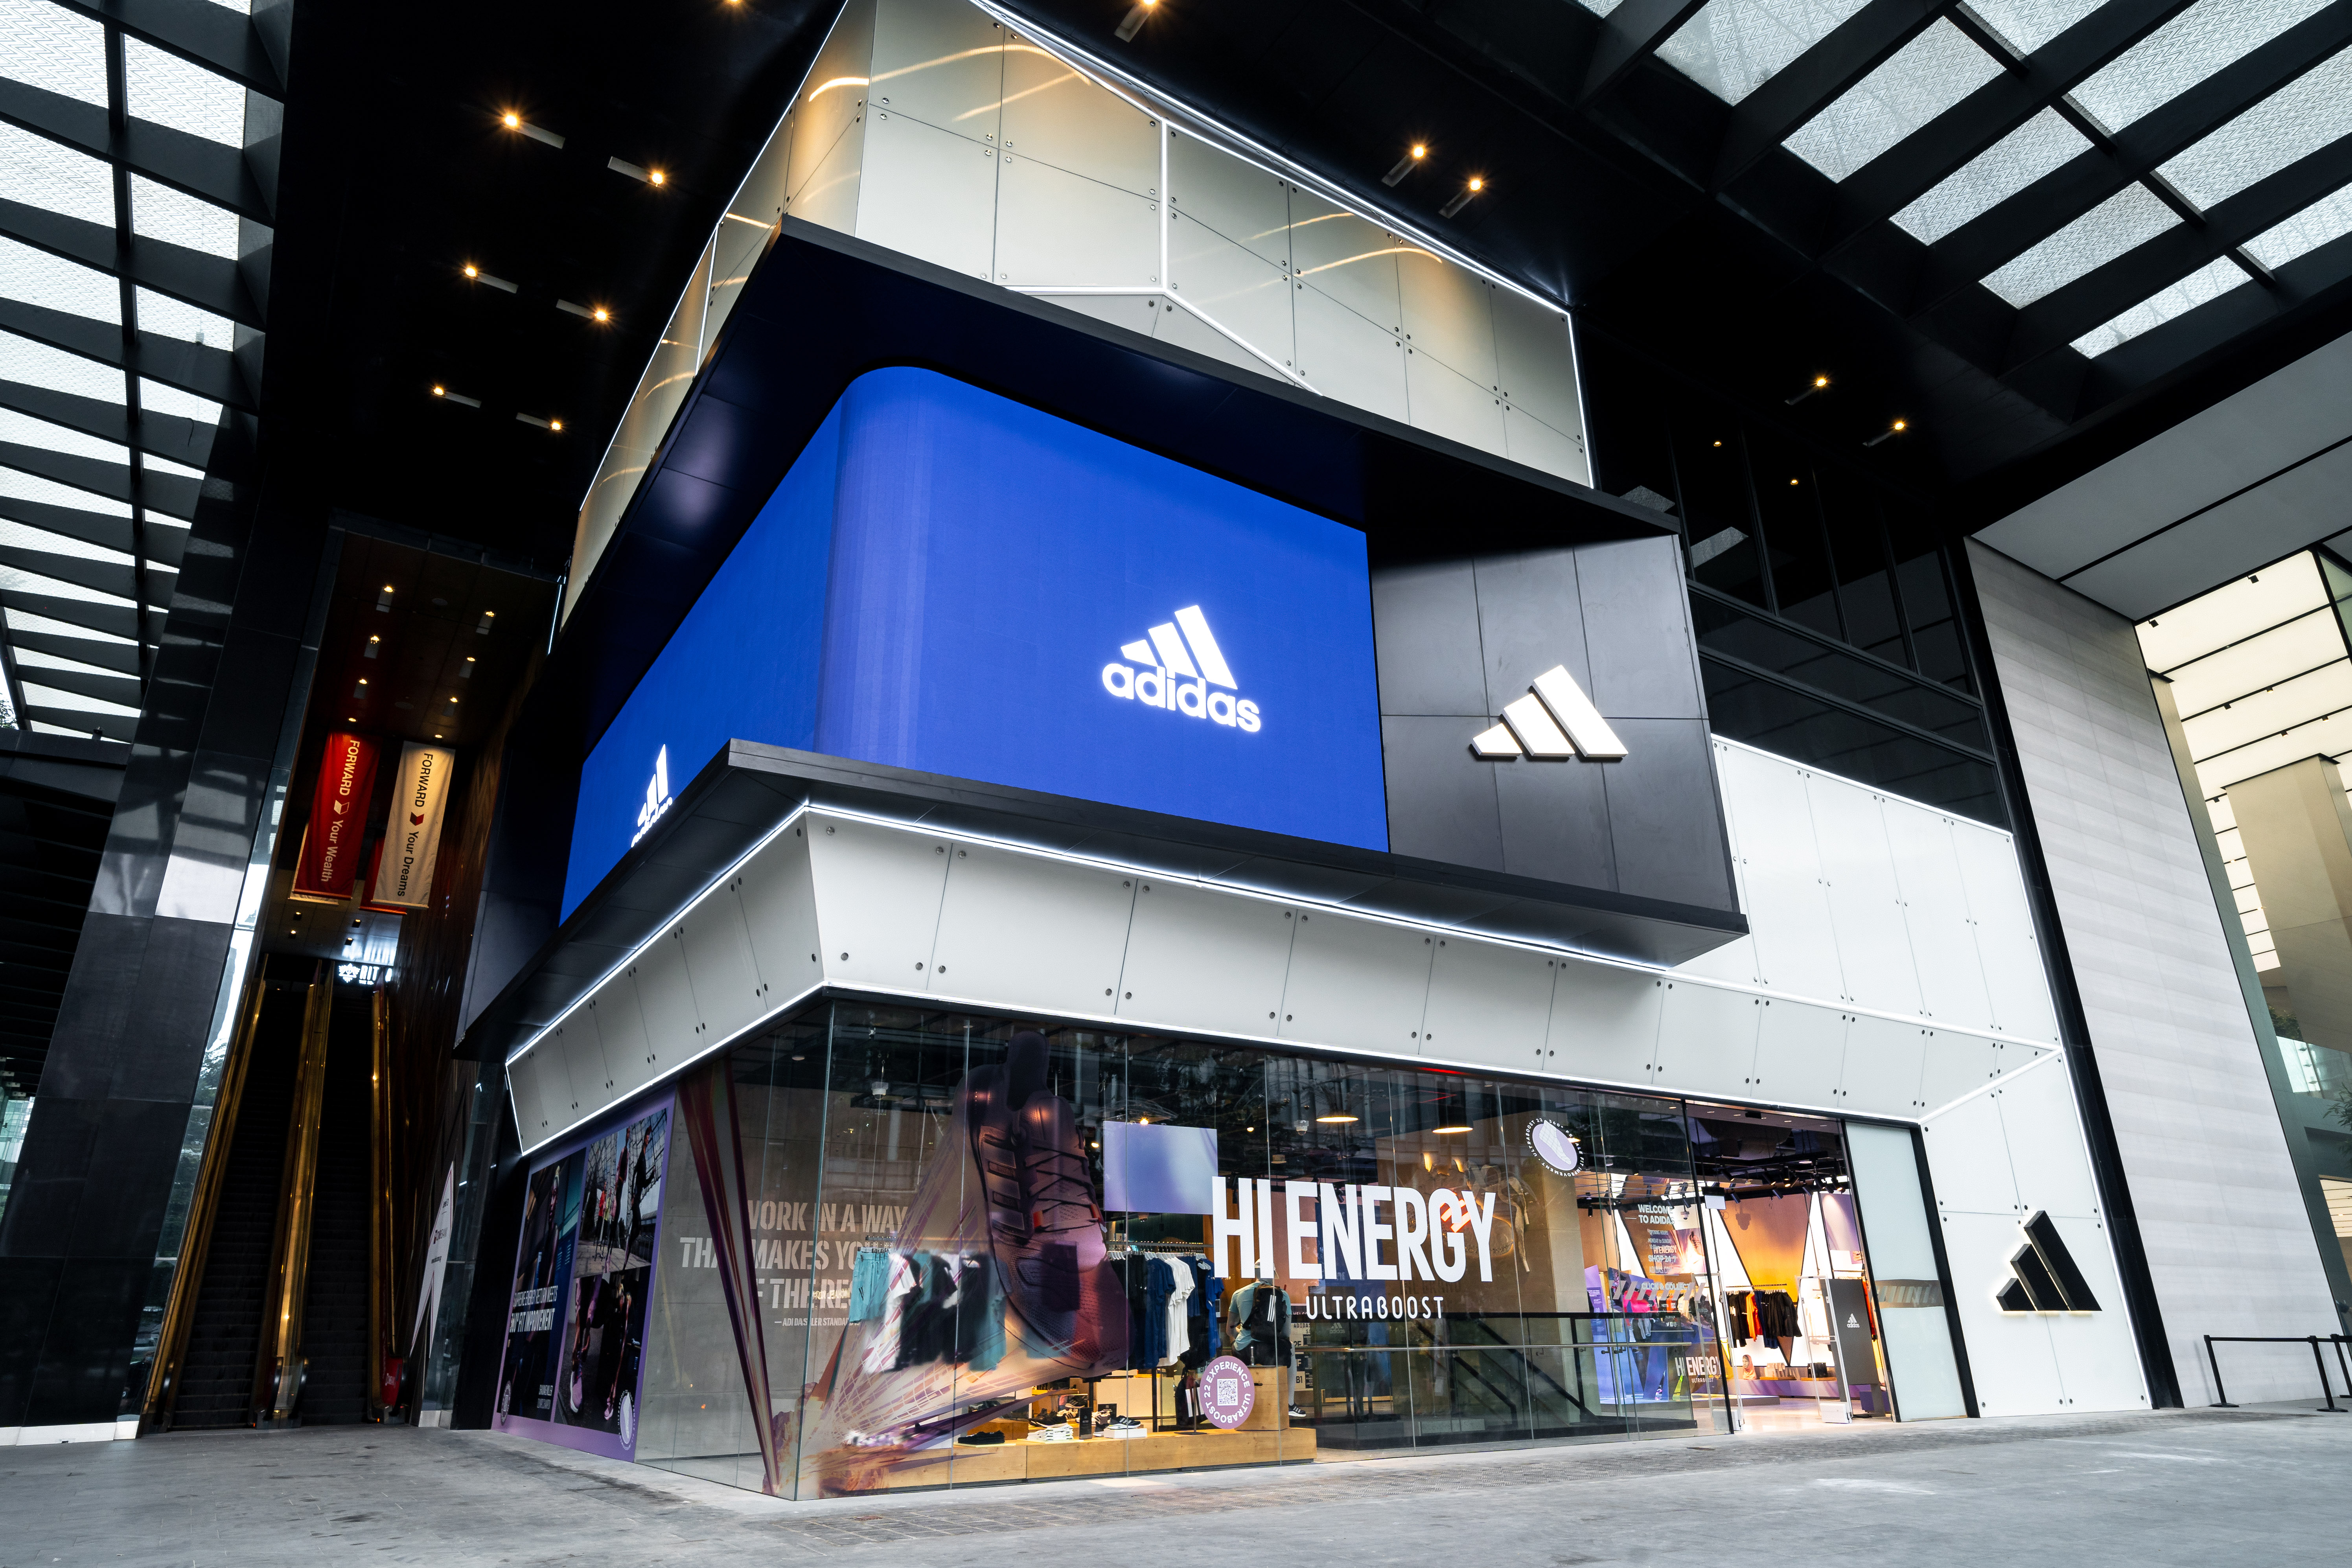 Adidas S'pore launches 1st brand centre along Orchard Road with 3 floors & Singapore-inspired elements - - News from Singapore, Asia and around the